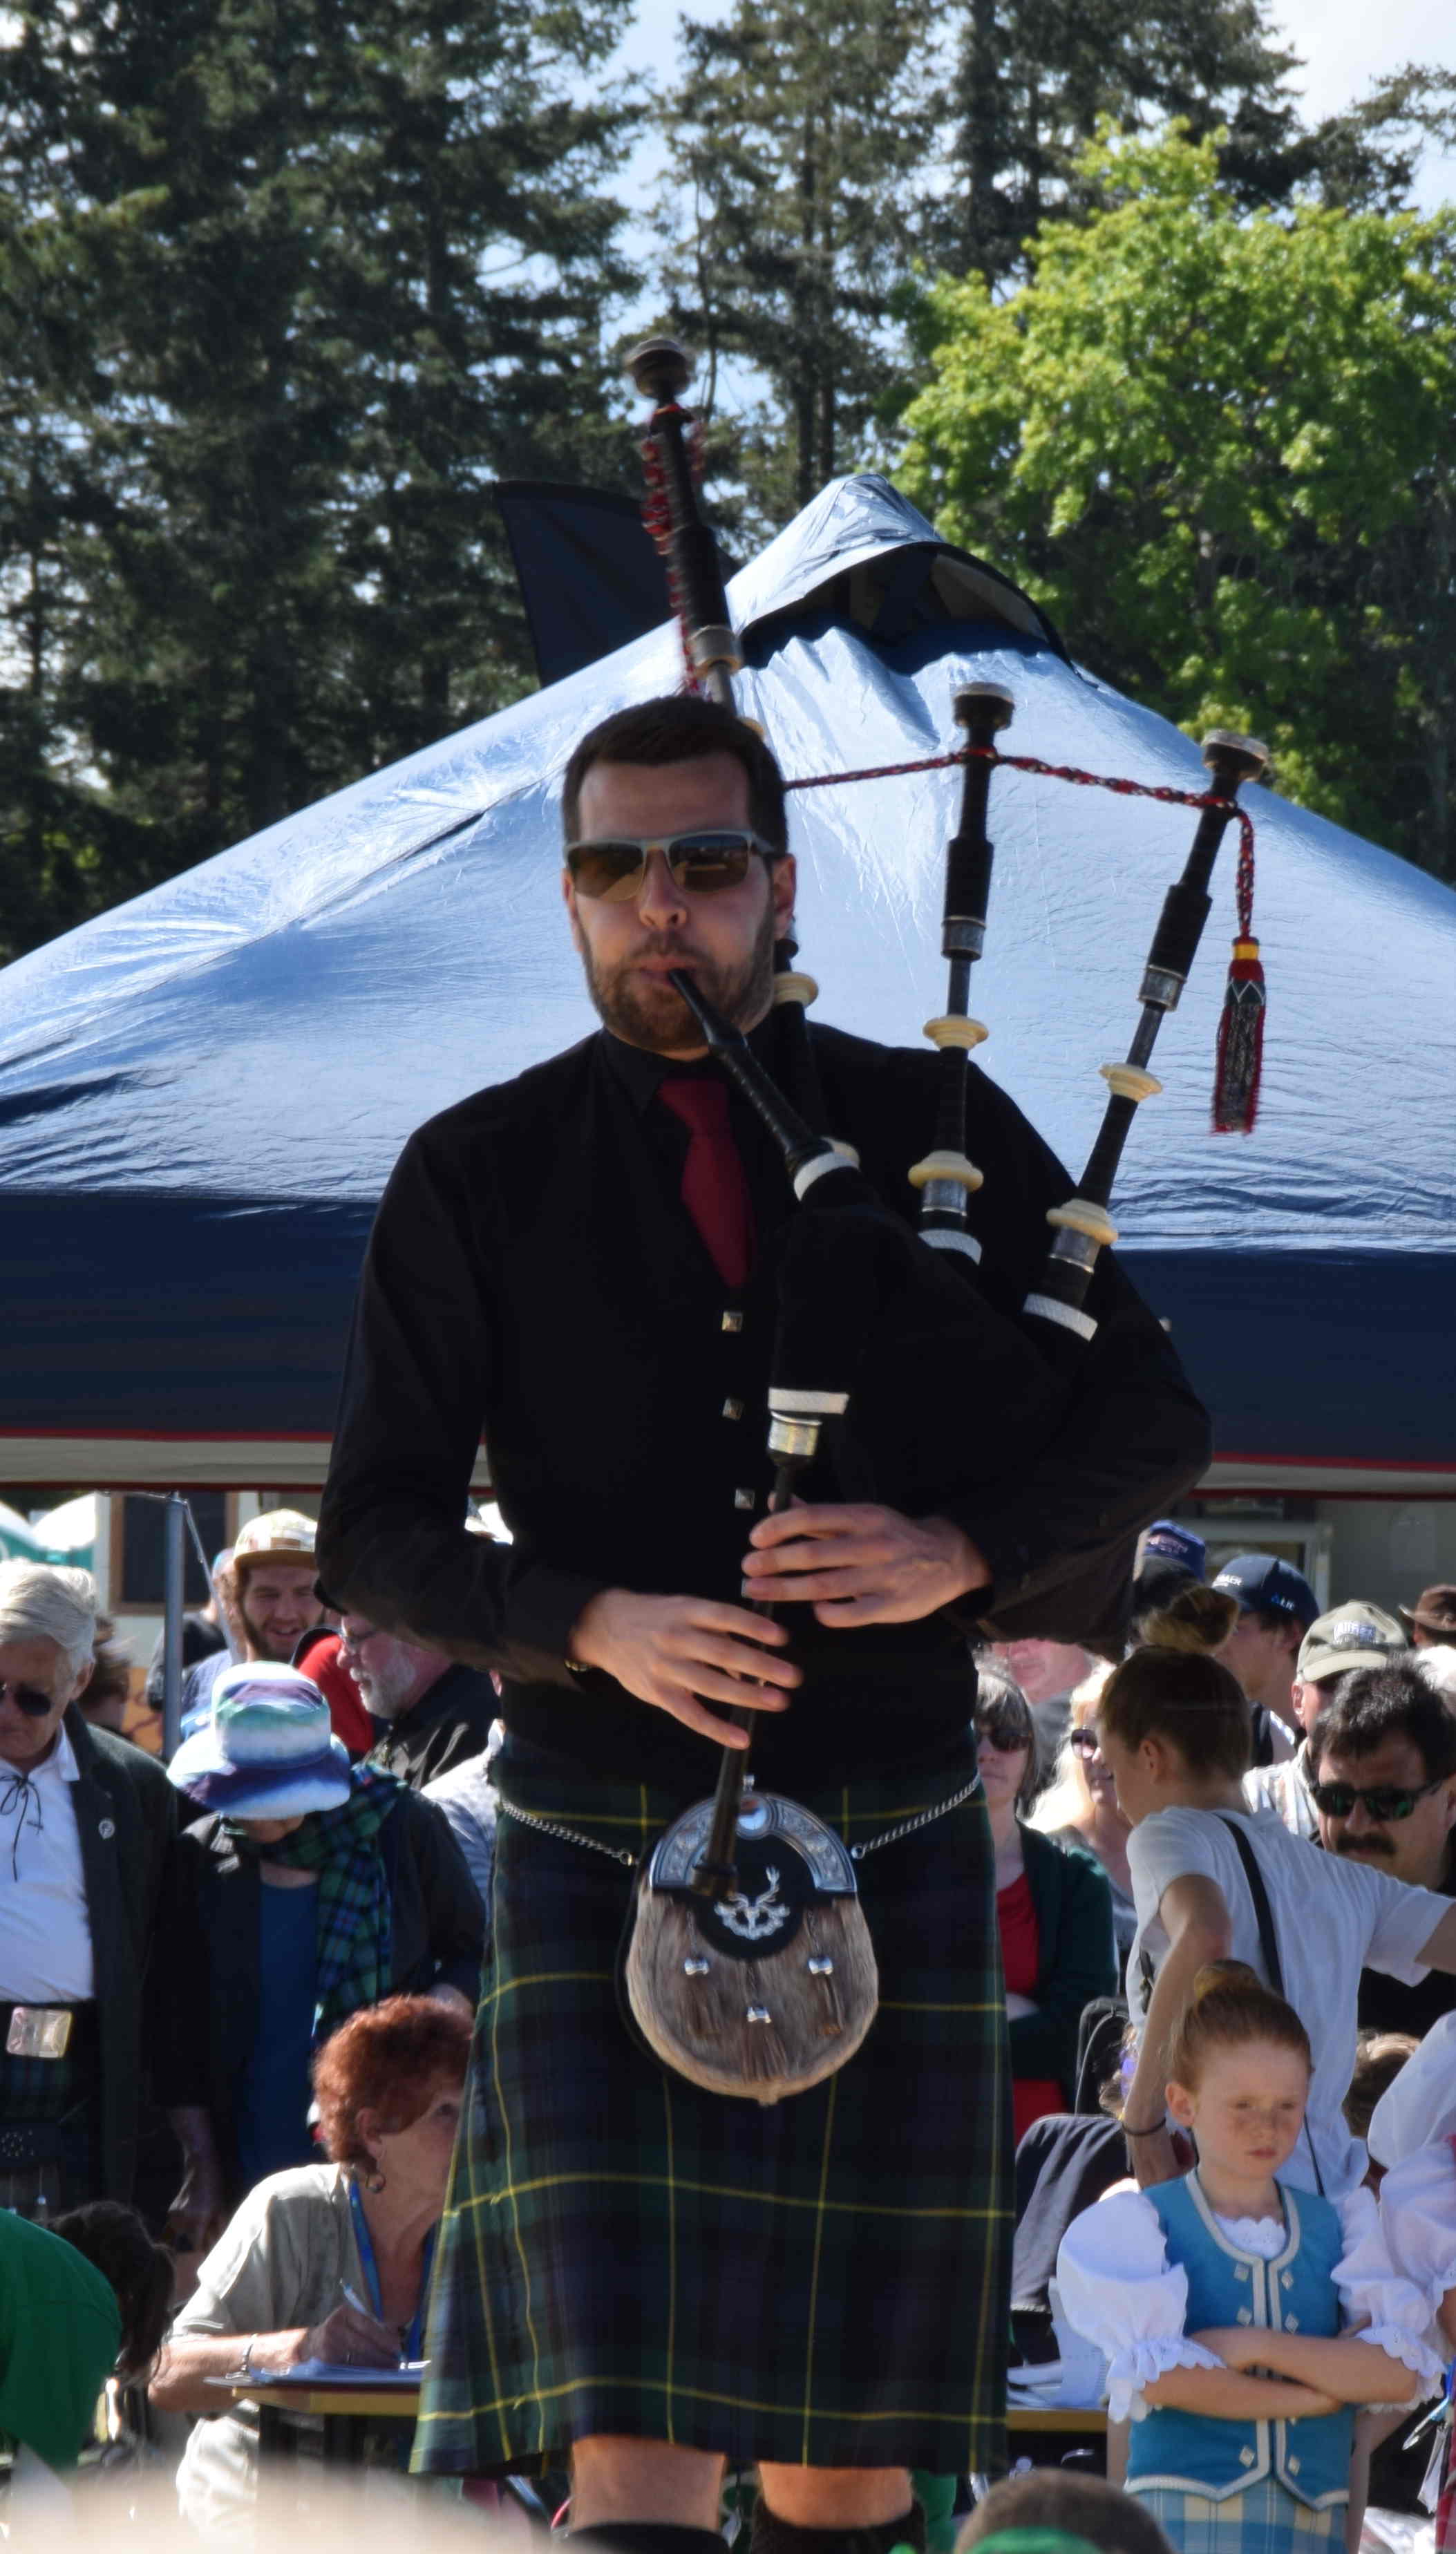 Kyle Warren, Chieftain for the Hororata Highland Games 2016, a piping 